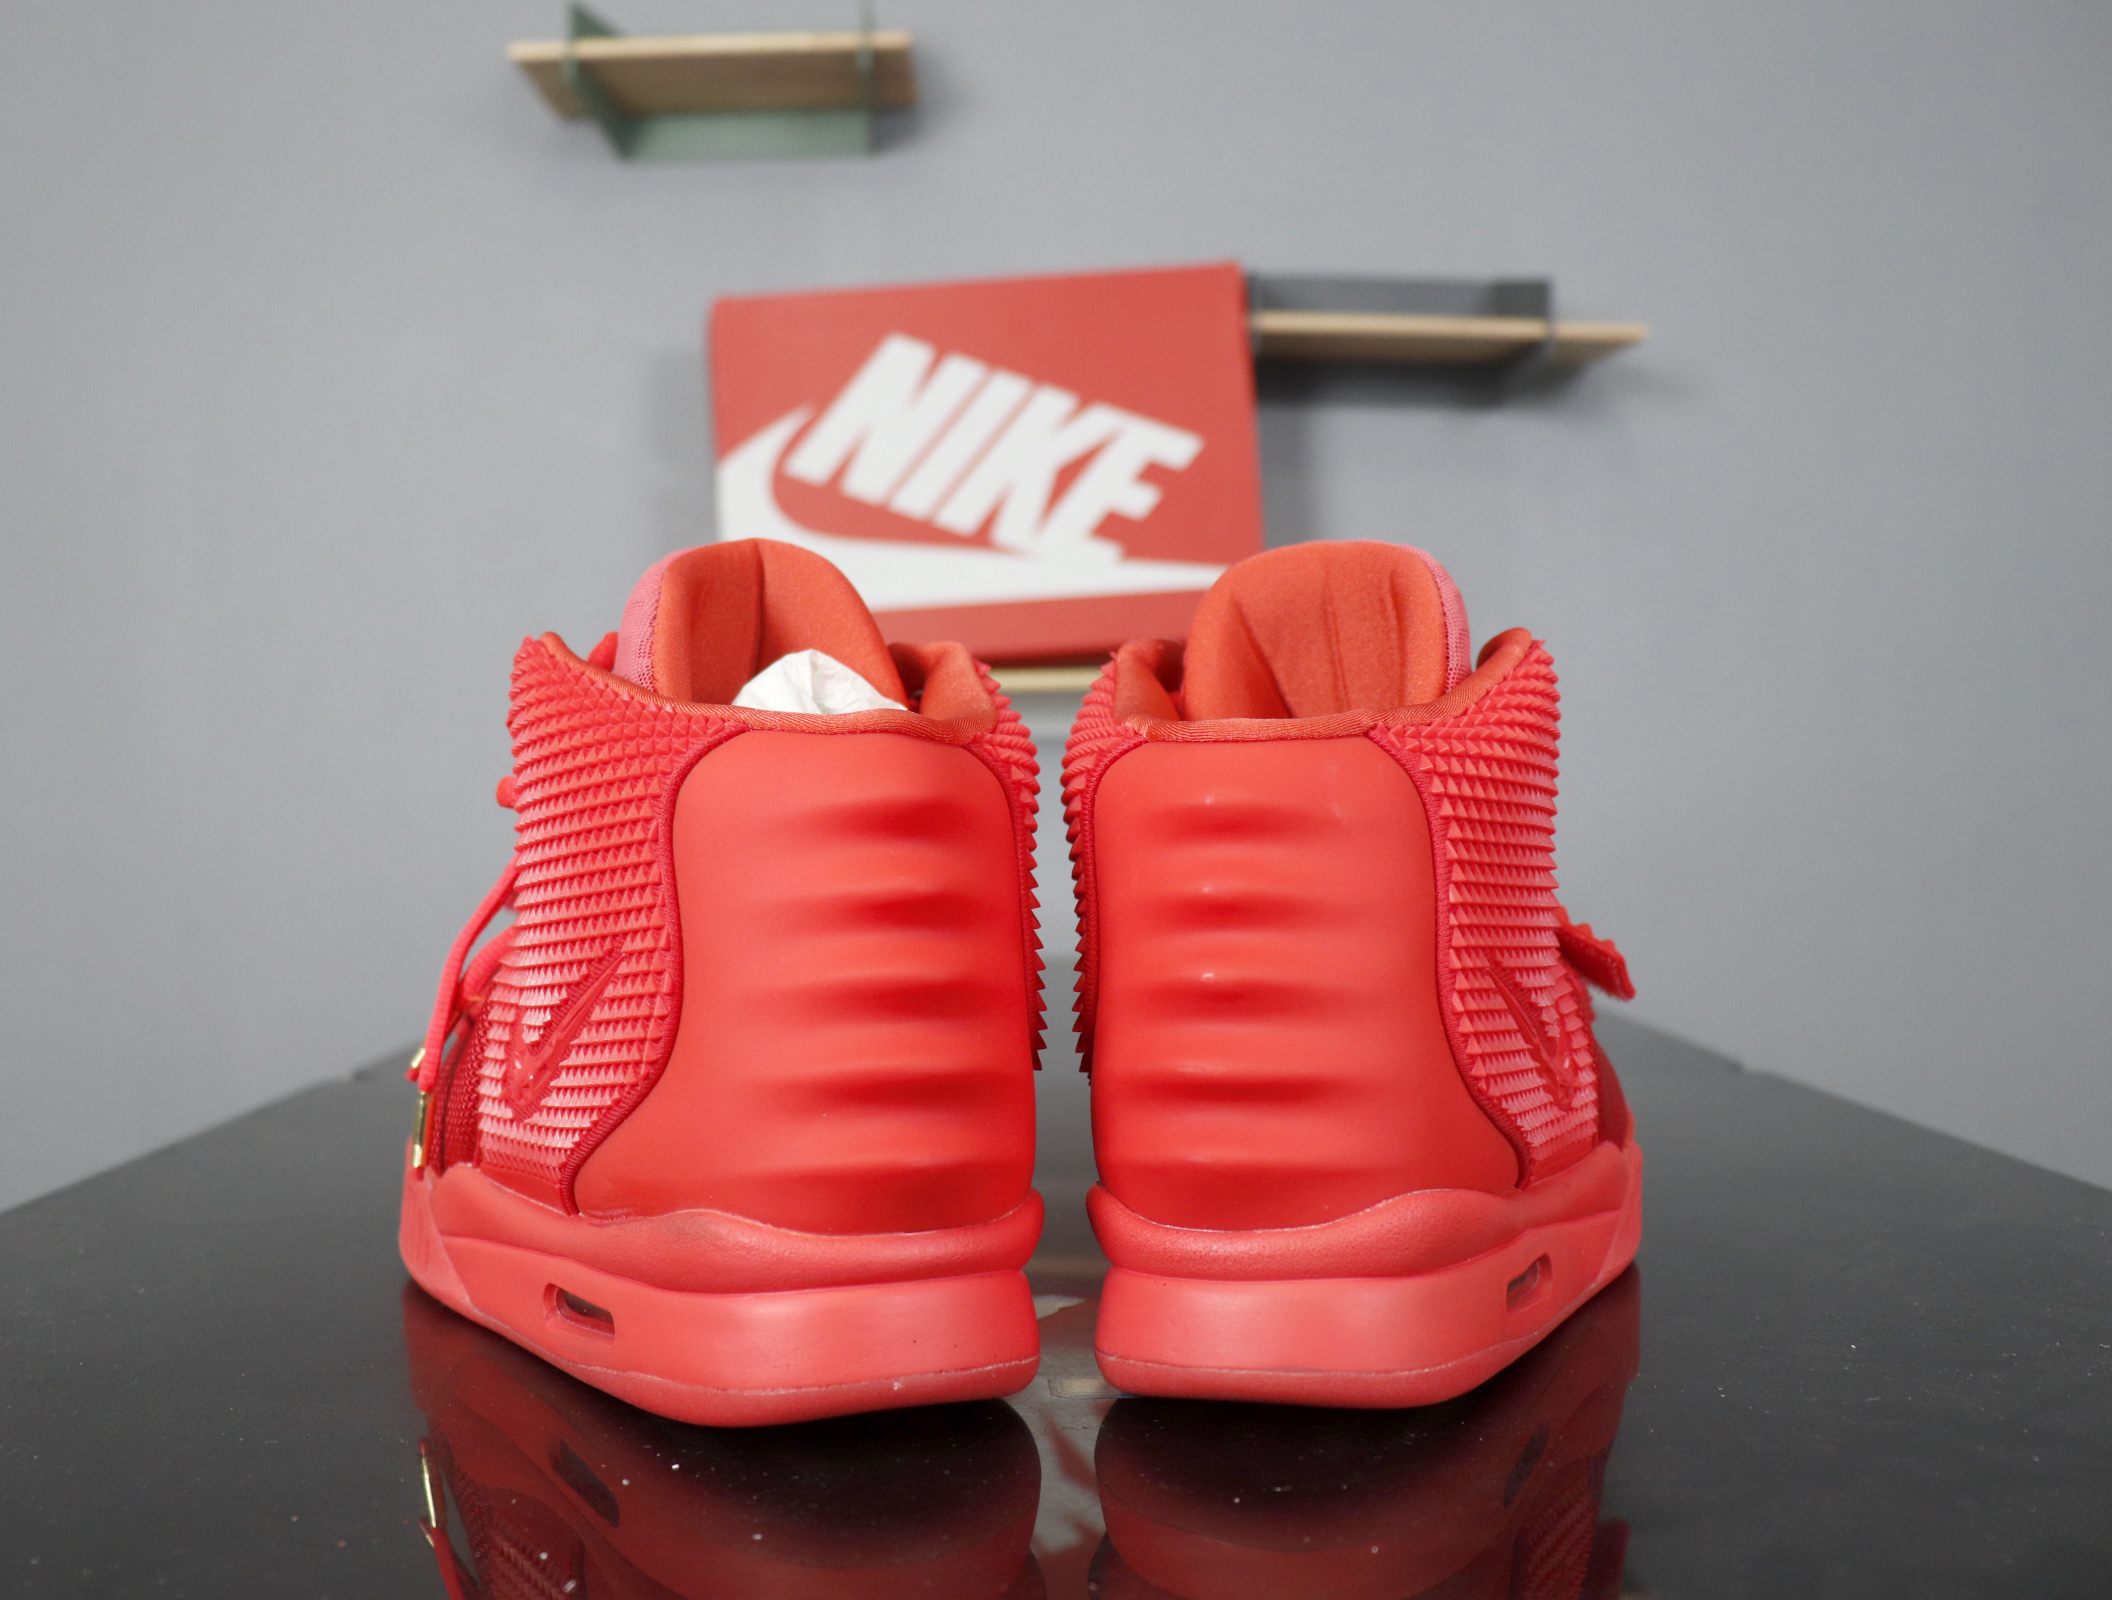 yeezy red october for sale